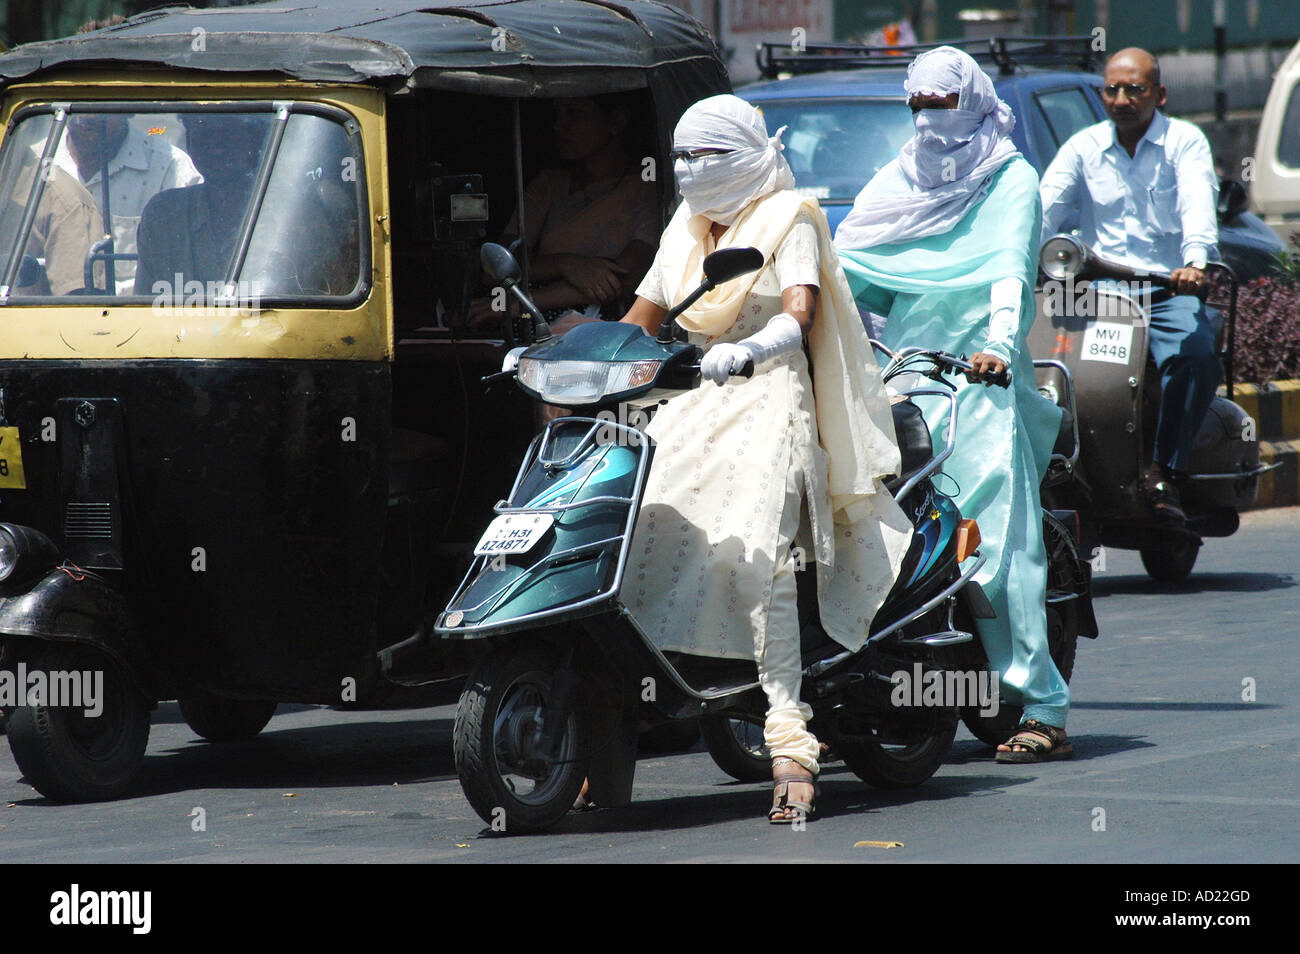 ASB73158 Two wheeler motor bike riders cover faces with scarfs to avoid summer heat and pollution at Nagpur Maharashtra India Stock Photo